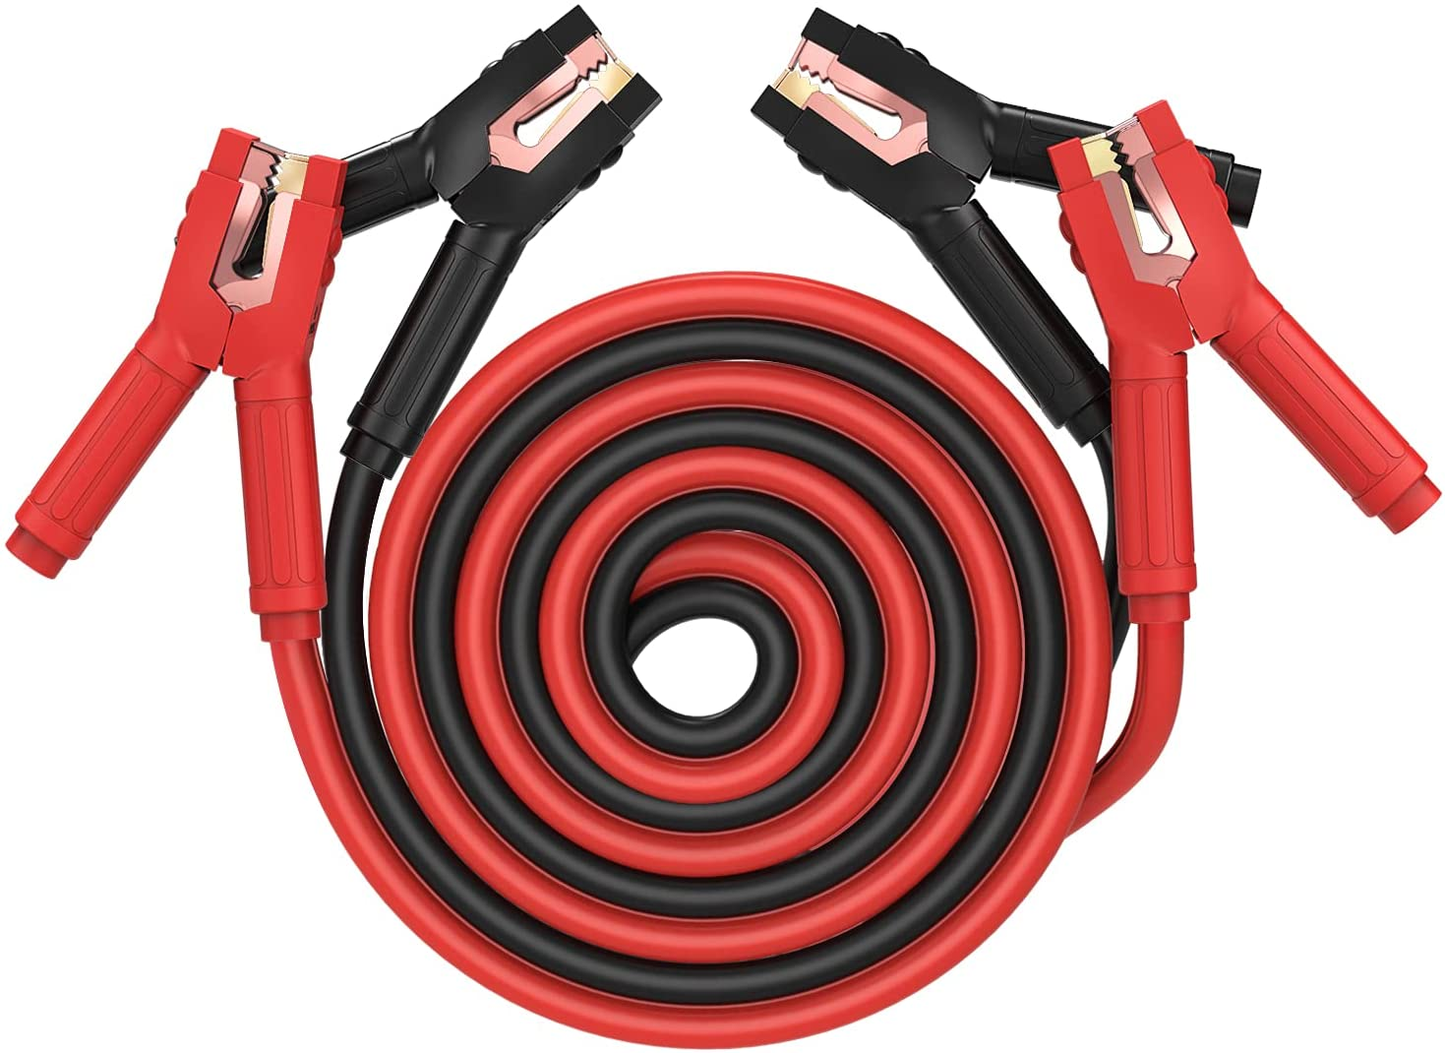 G130 Heavy Duty Jumper Cables, Booster Cables with Clamps, Jumper Cables Kit for Car, SUV and Trucks with up to 8-Liter Gasoline and 6-Liter Diesel Engines